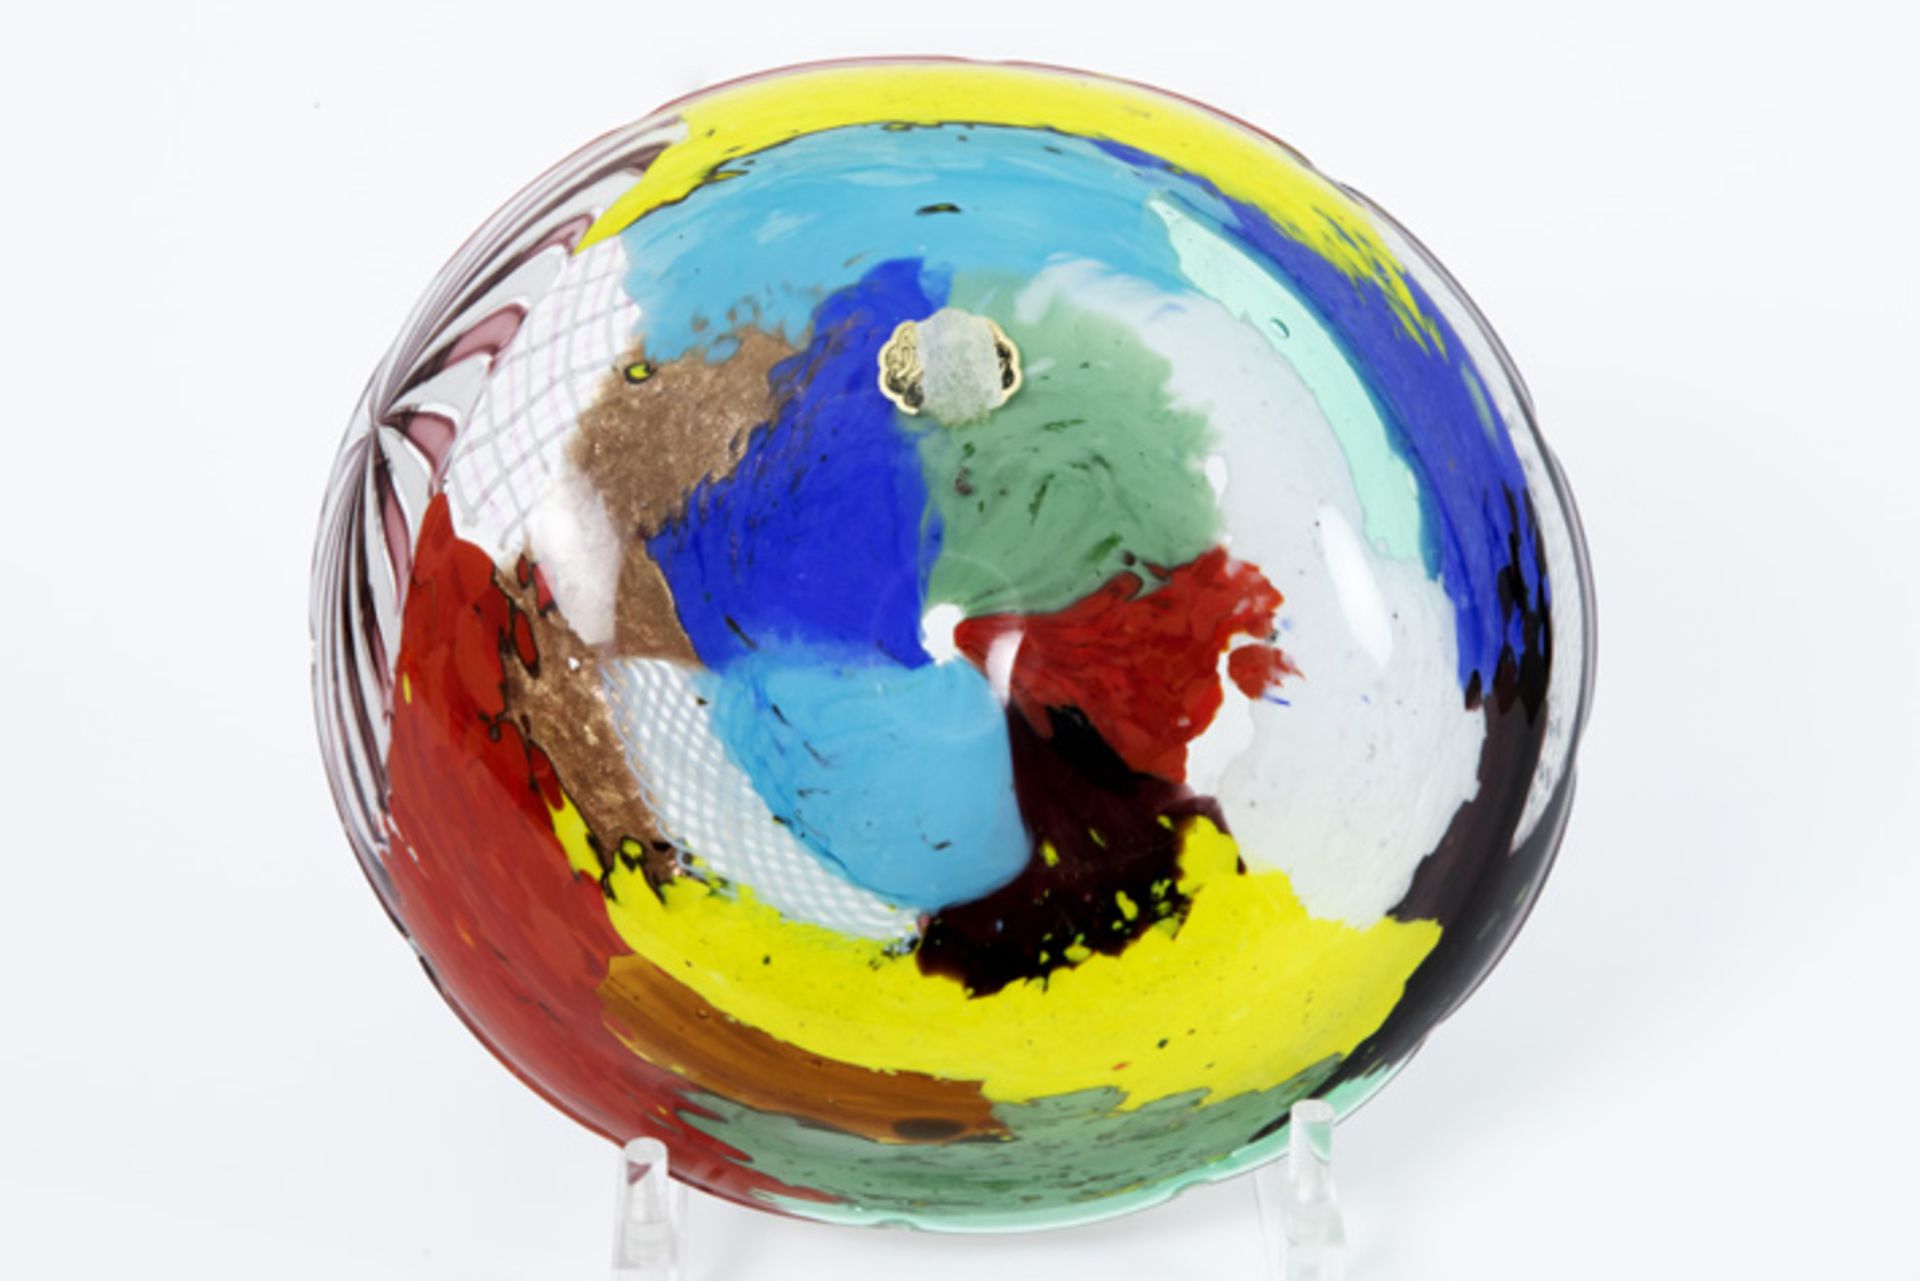 fifties' Dino Martens "Oriente" bowl in glass with color powders, zanfirico and murrina||DINO - Image 2 of 4